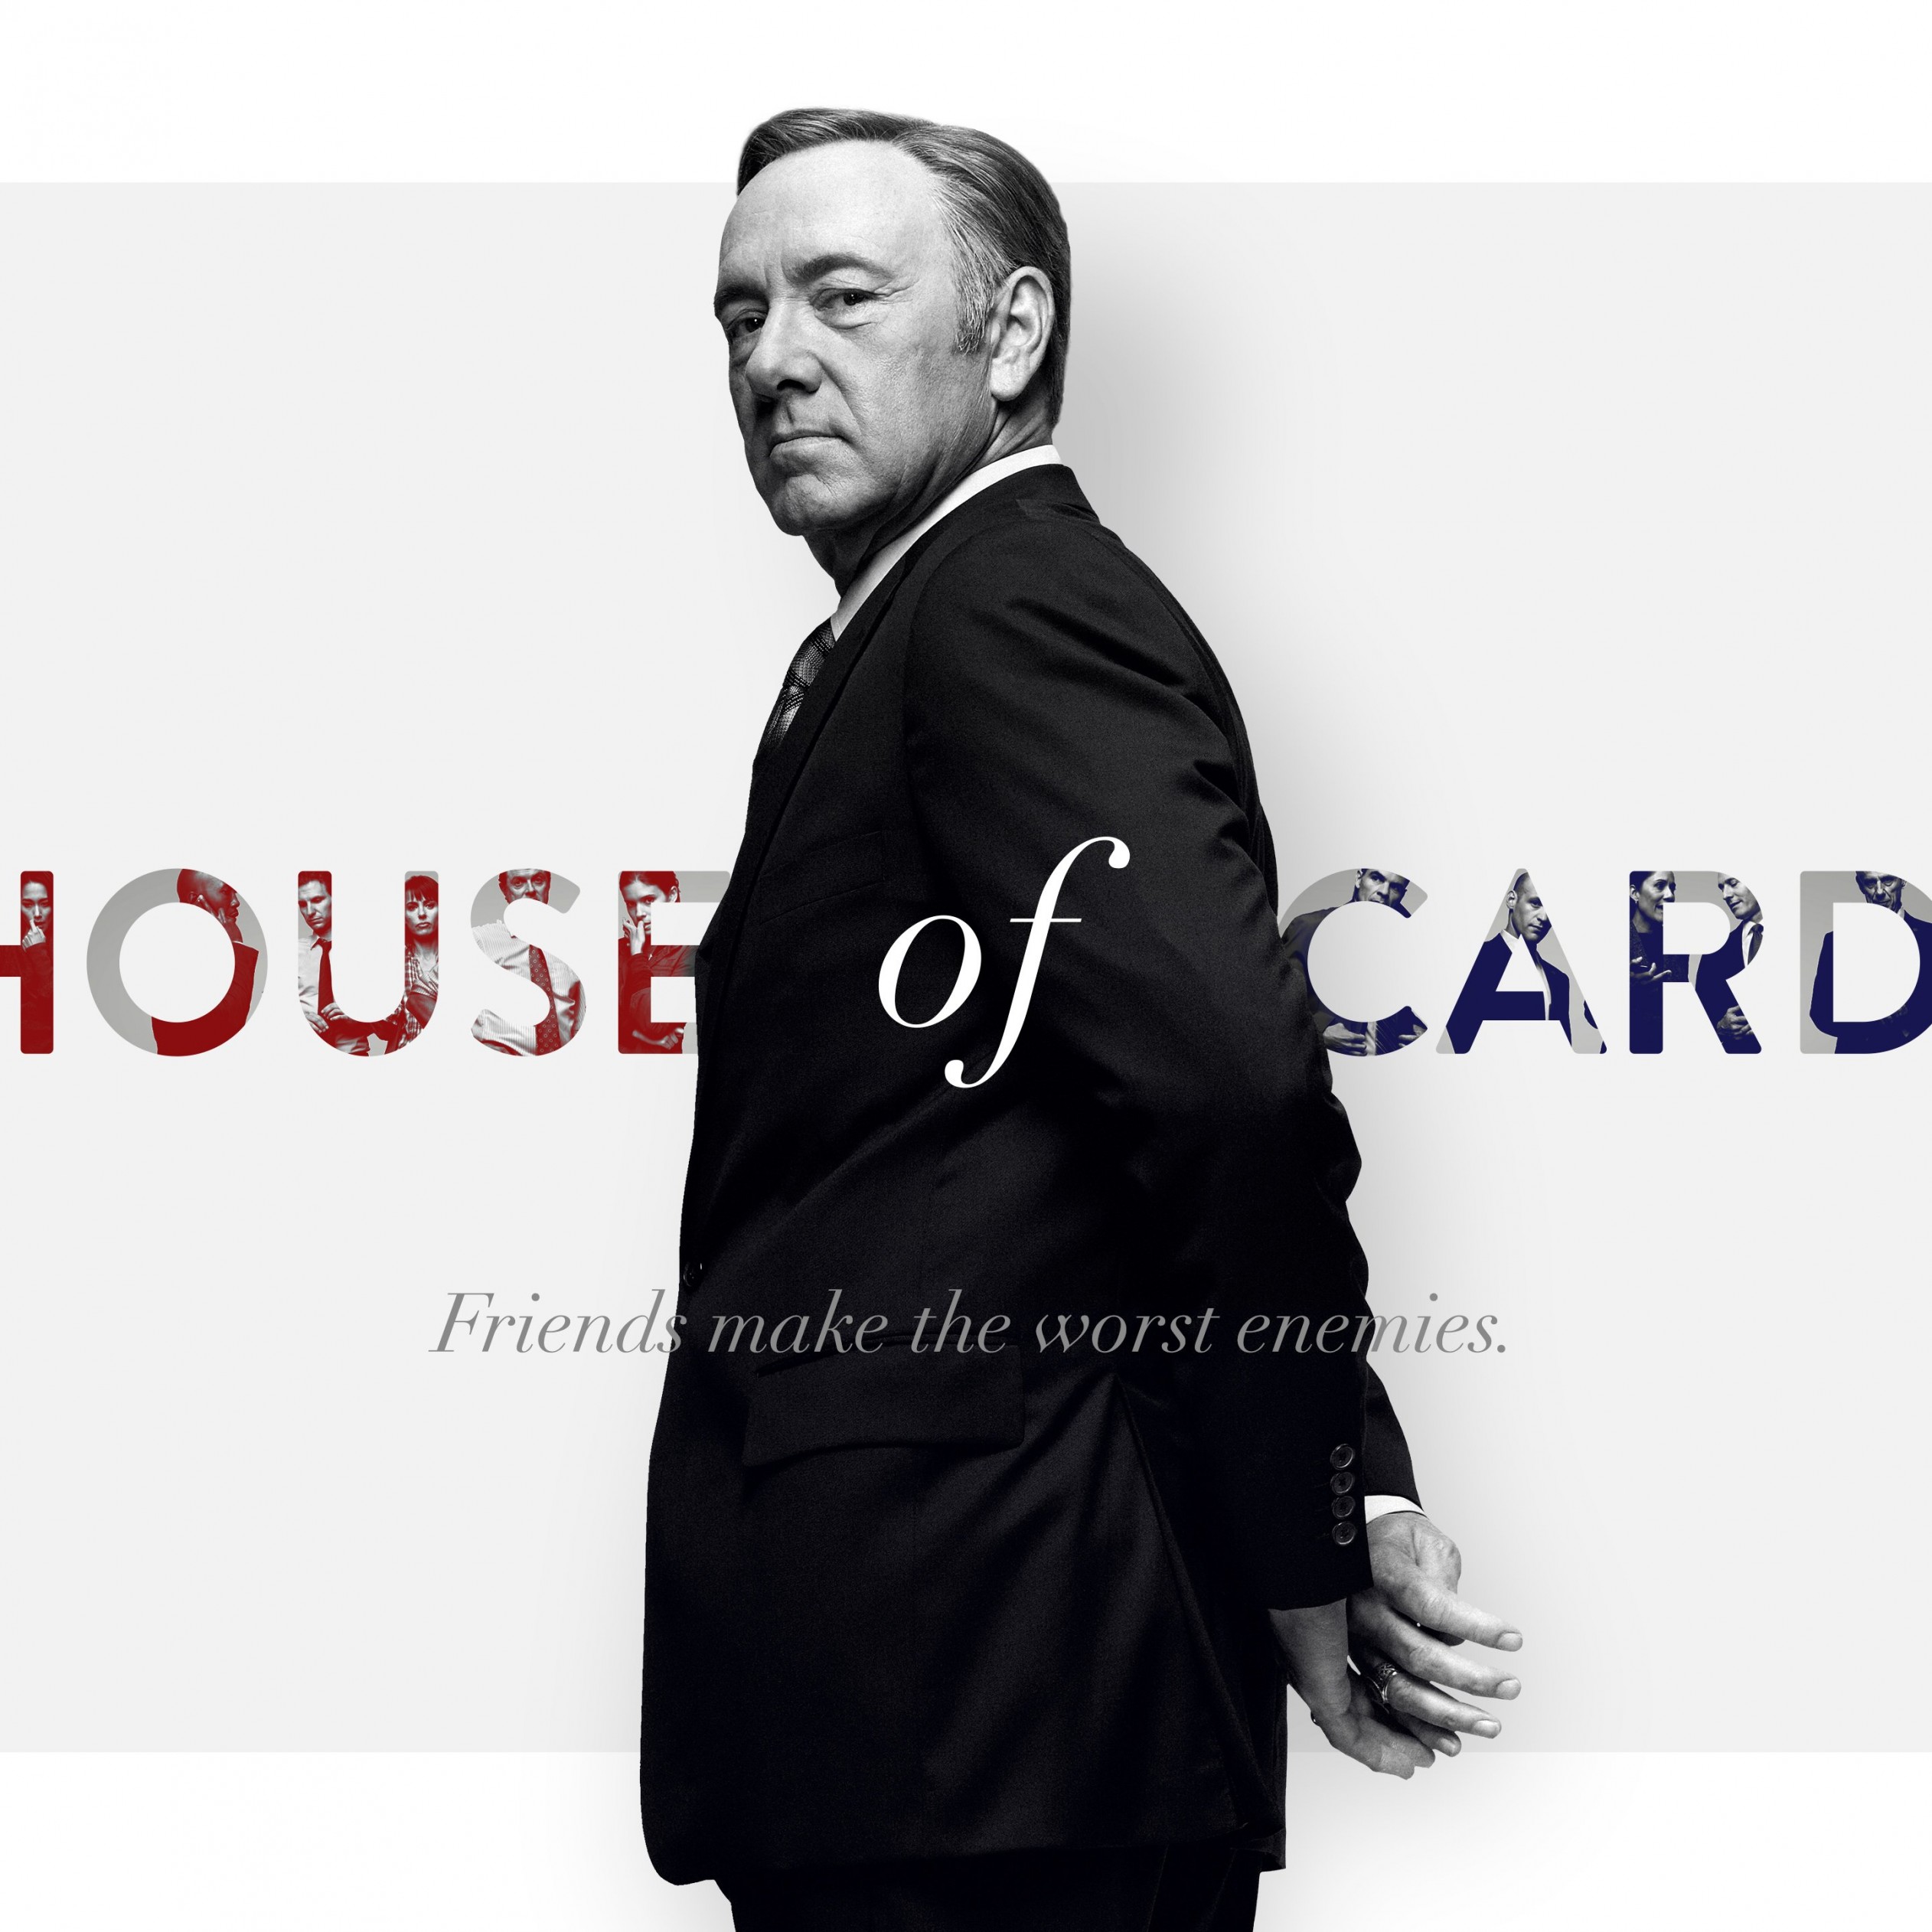 Frank Underwood - House of Cards Wallpaper for Apple iPad 4